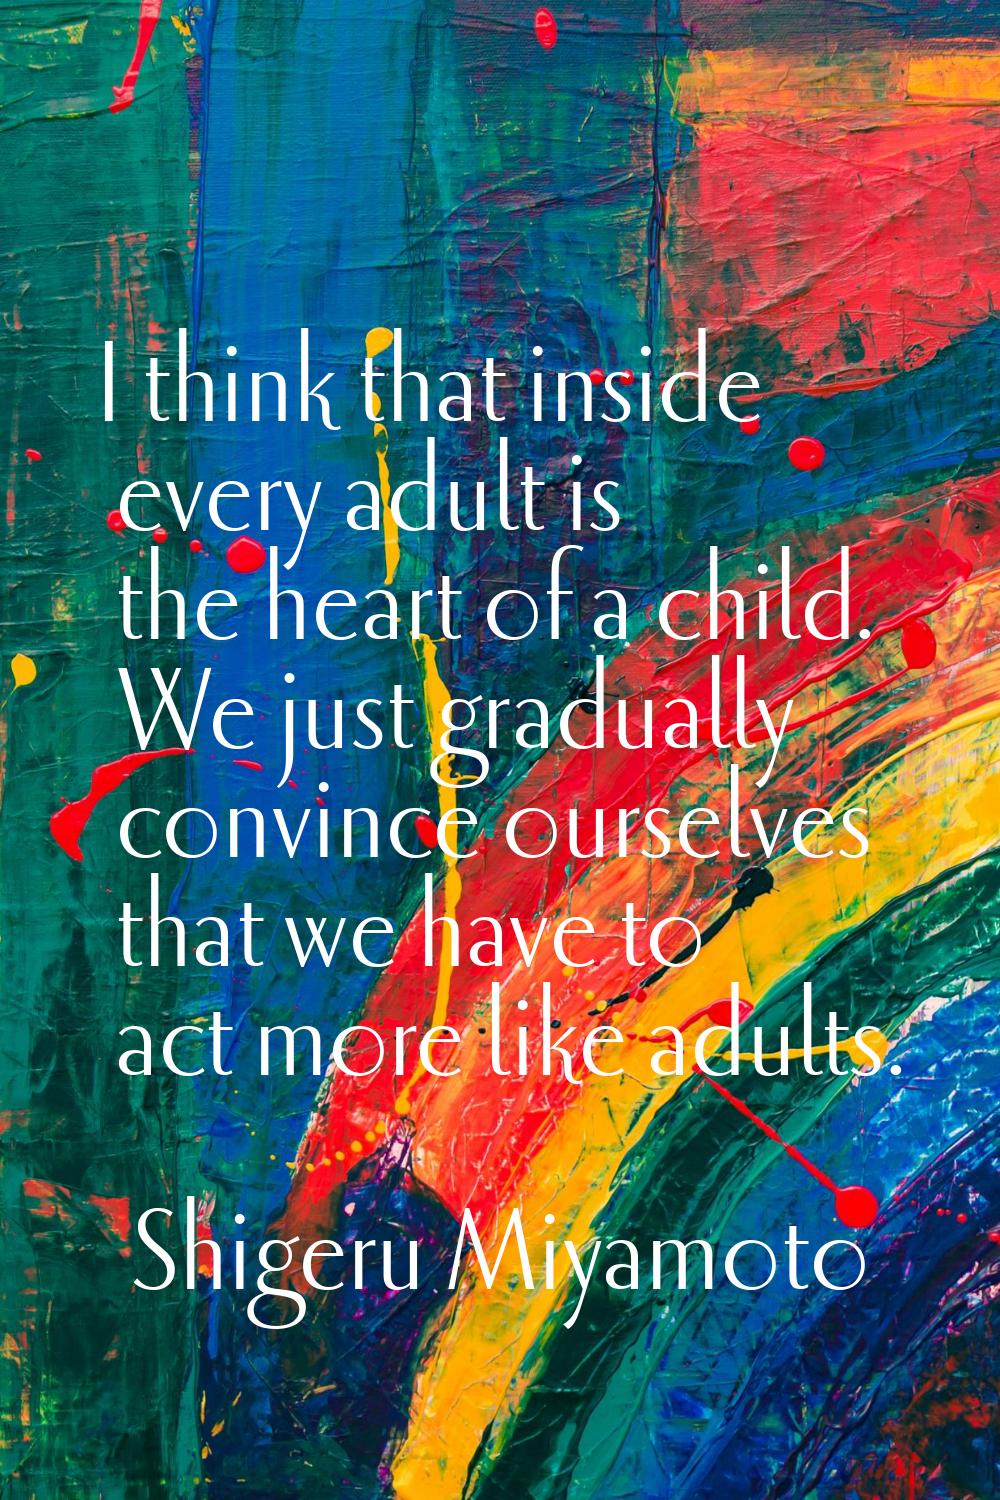 I think that inside every adult is the heart of a child. We just gradually convince ourselves that 